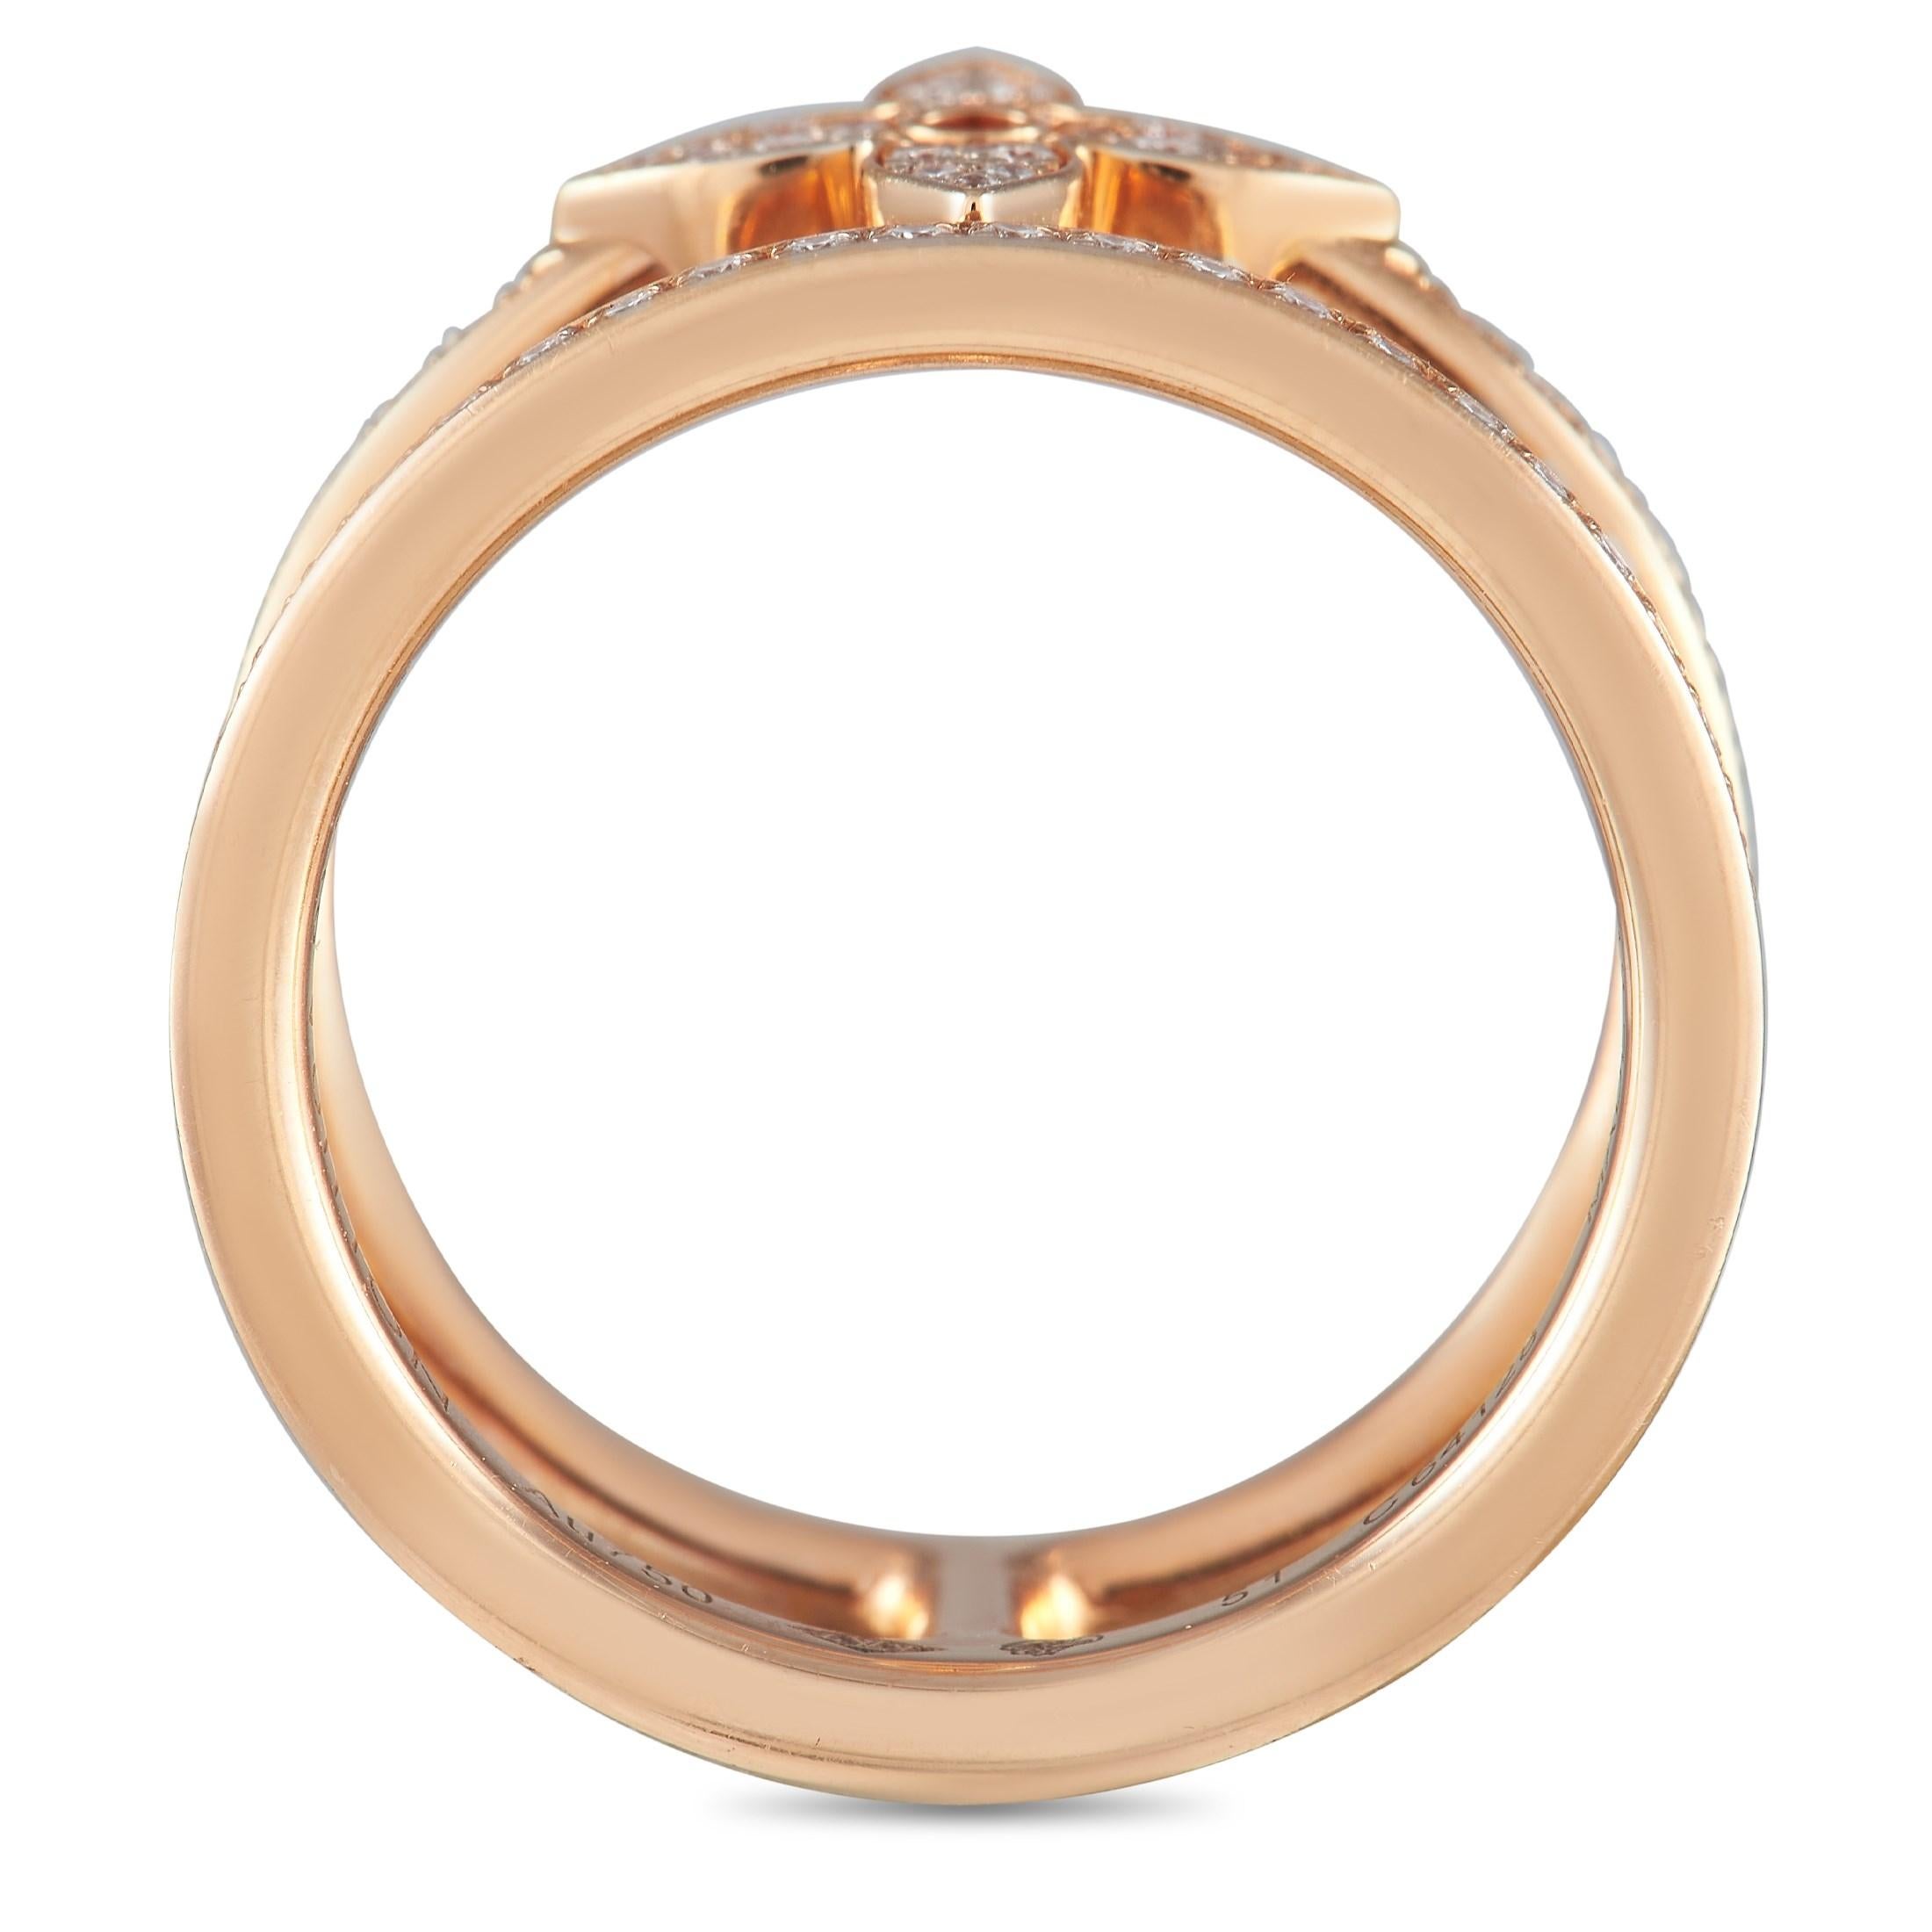 Express your refined sense of style through this Louis Vuitton Idylle Blossom 18K Rose Gold 0.56 ct Diamond Two Row Ring. A piece jewelry that is oh-so-elegant, this wide double row open band features sparkling diamond pavé and Louis Vuitton's